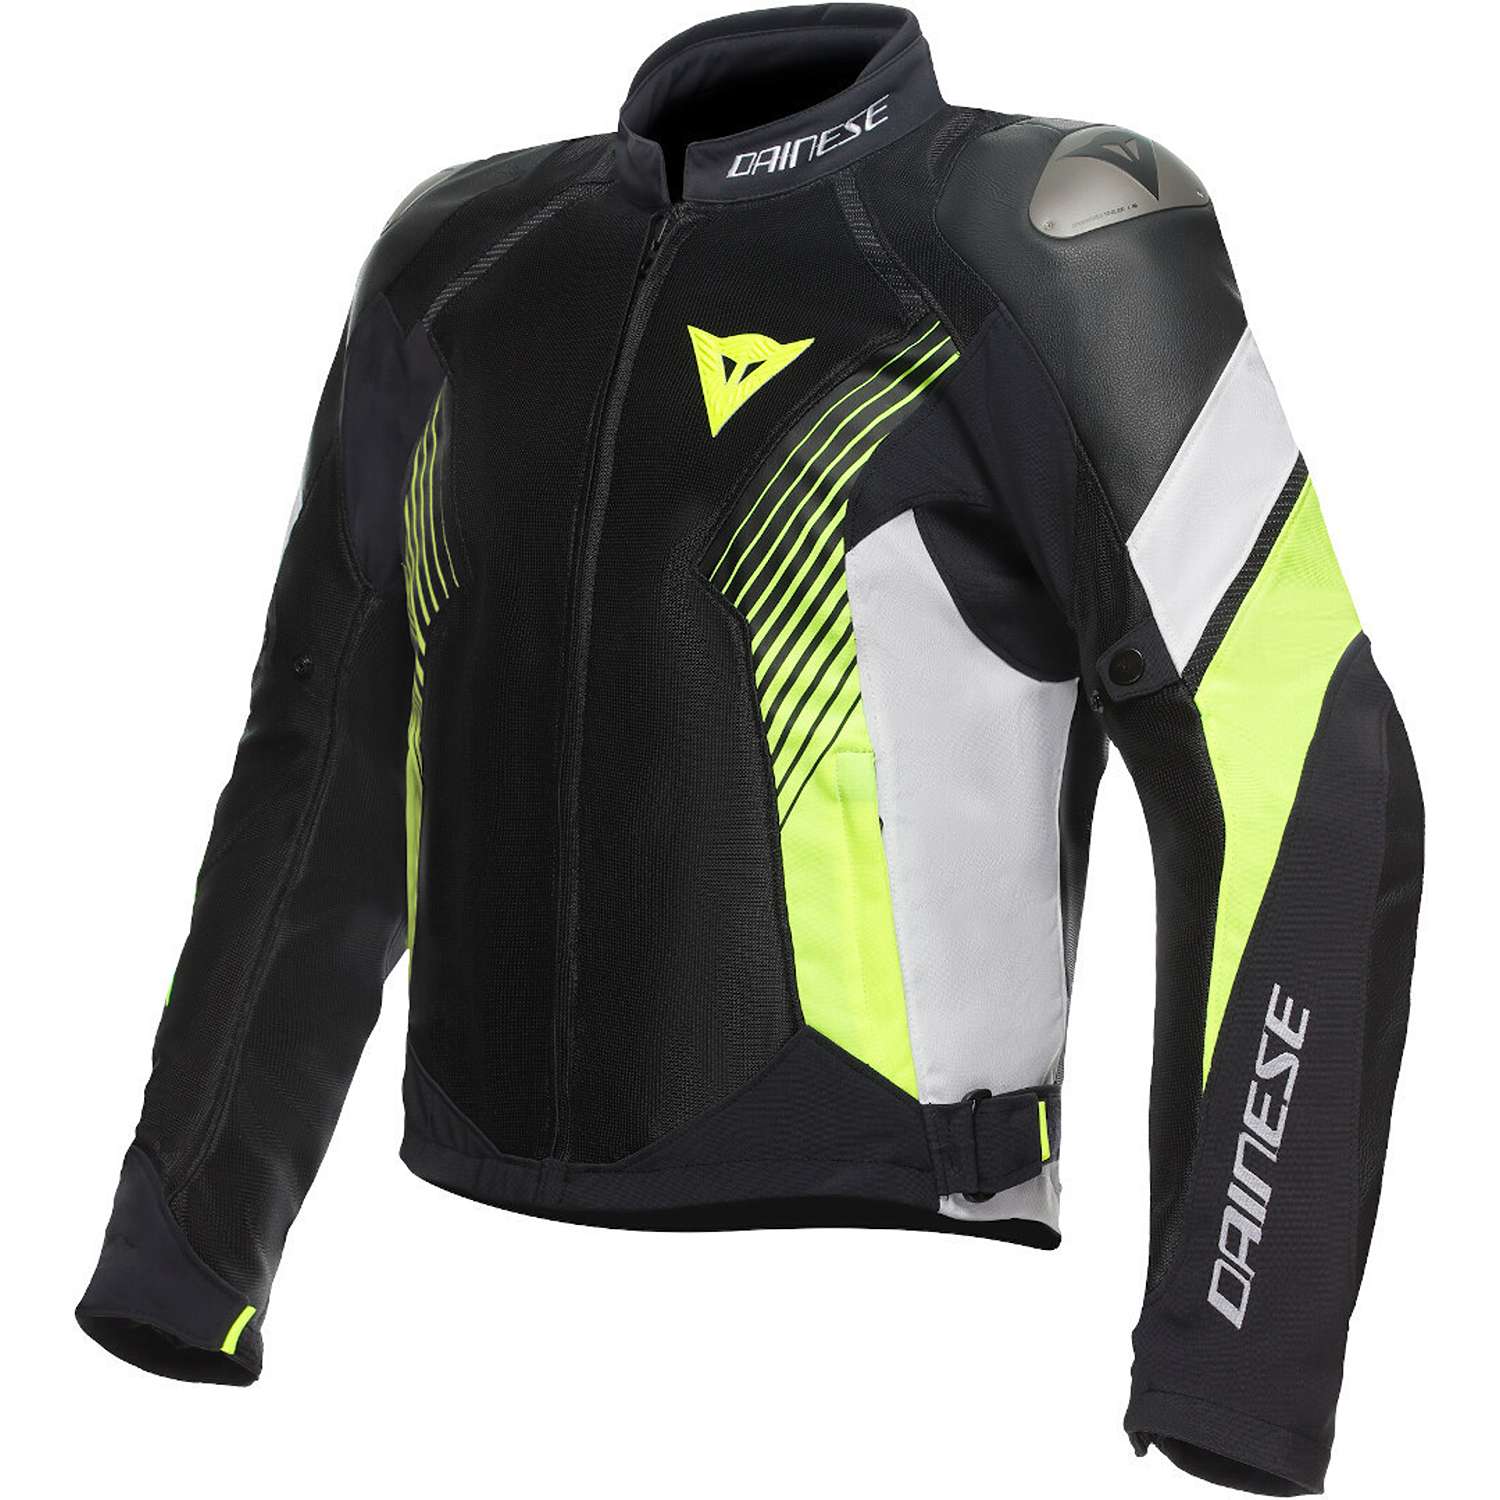 Image of Dainese Super Rider 2 Absoluteshell Jacket Black White Fluo Yellow Talla 58